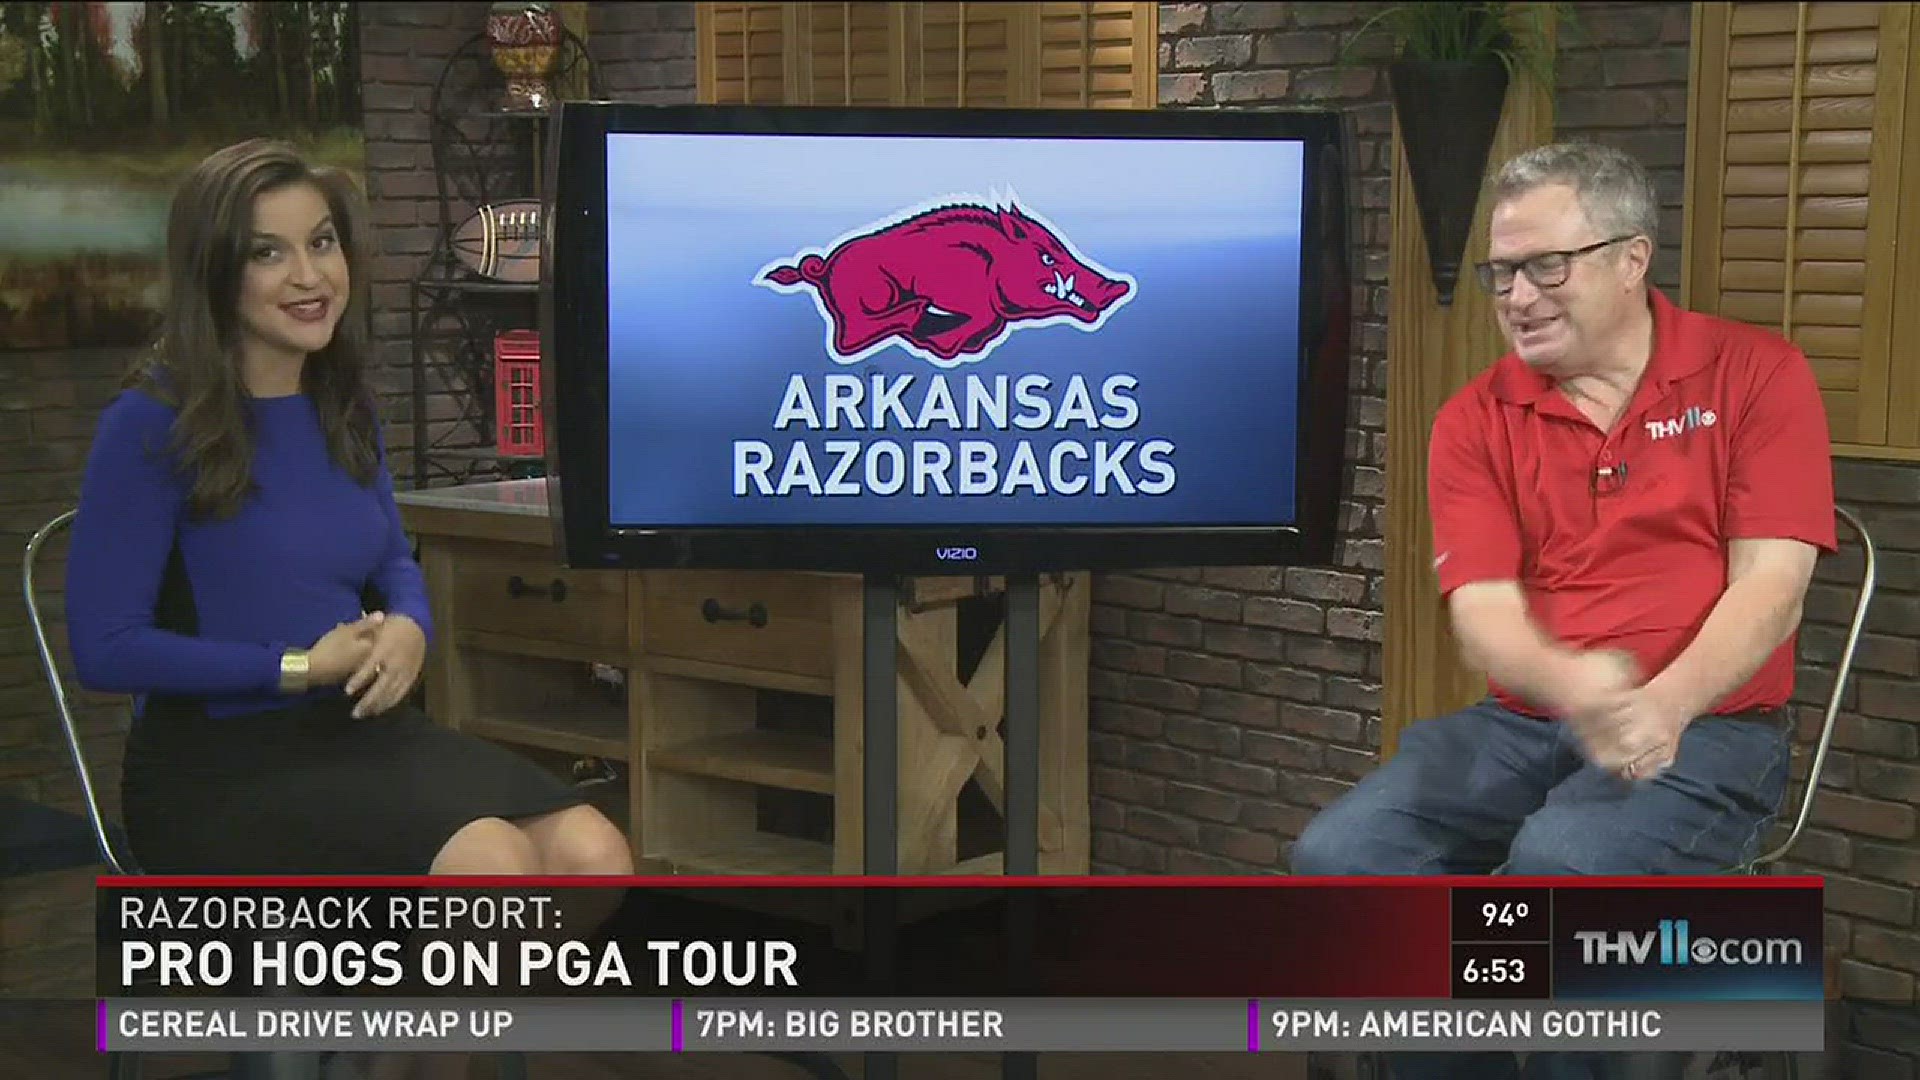 Mary Dunleavy interviews Jim Harris about the Razorbacks at the PGA Tour